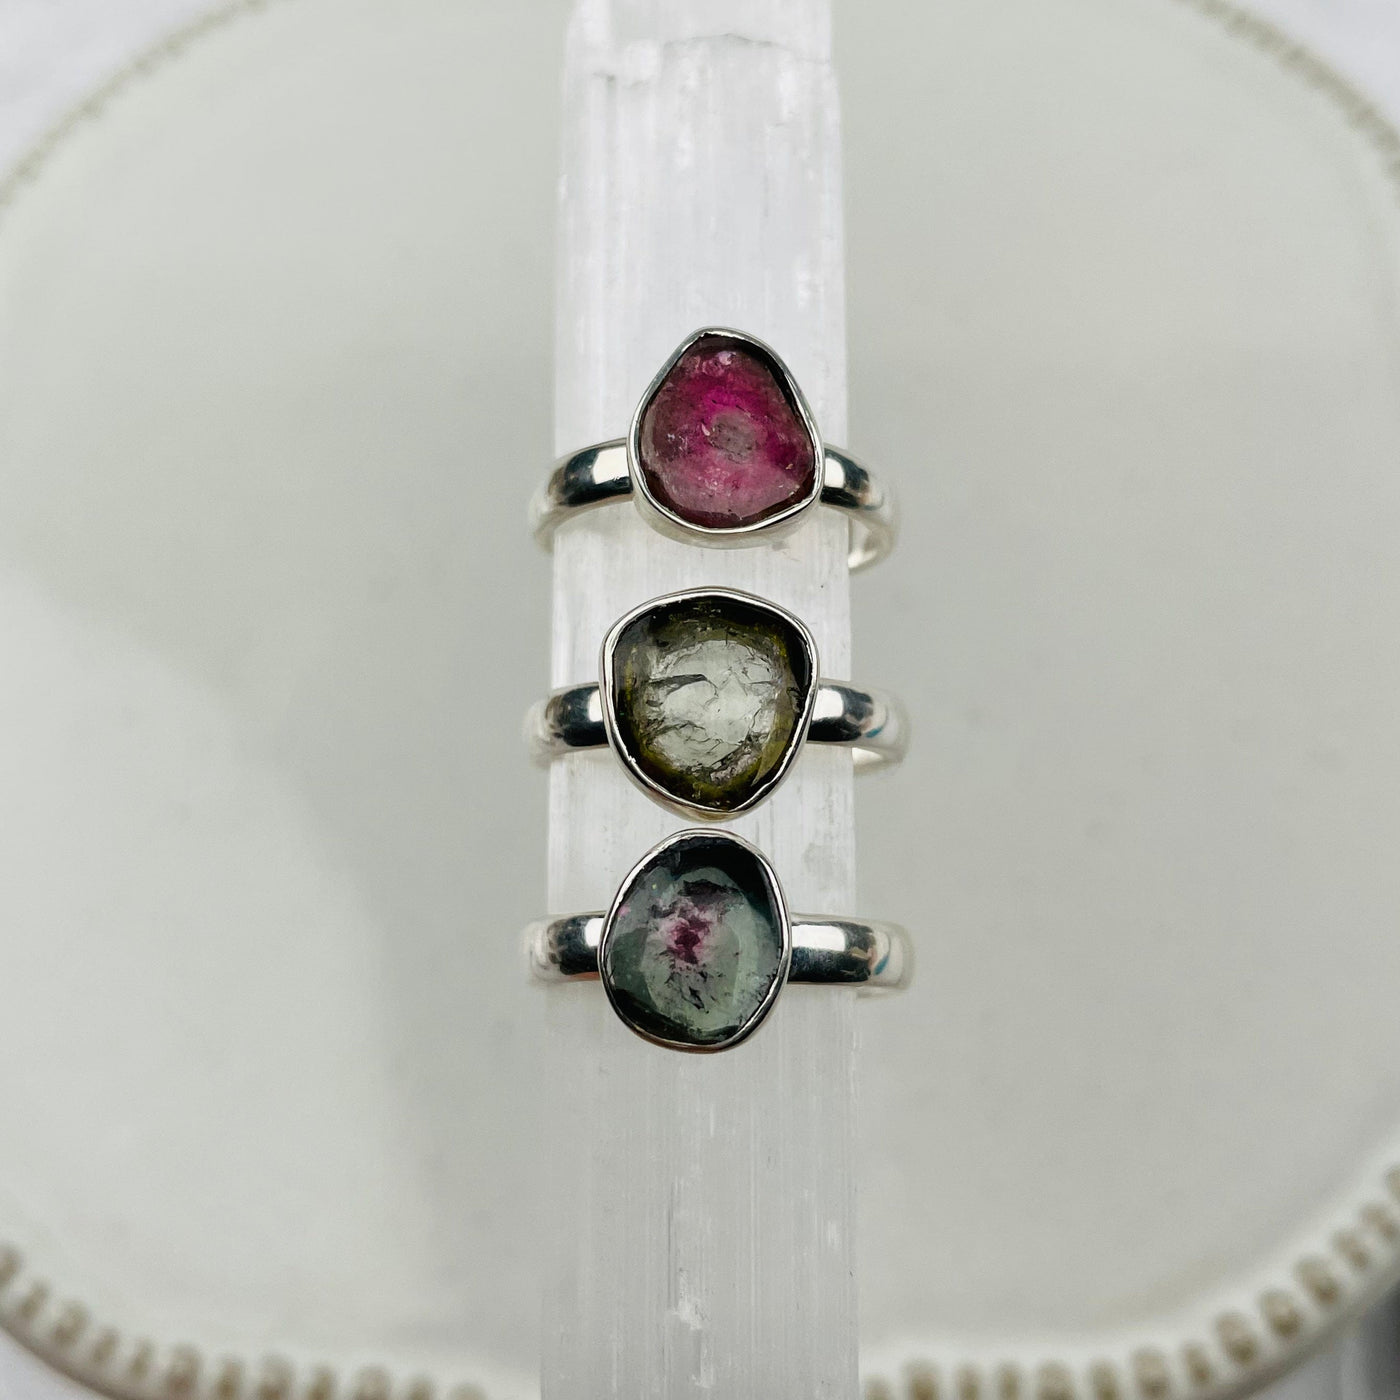 multiple rings displayed to show the differences in the ring details